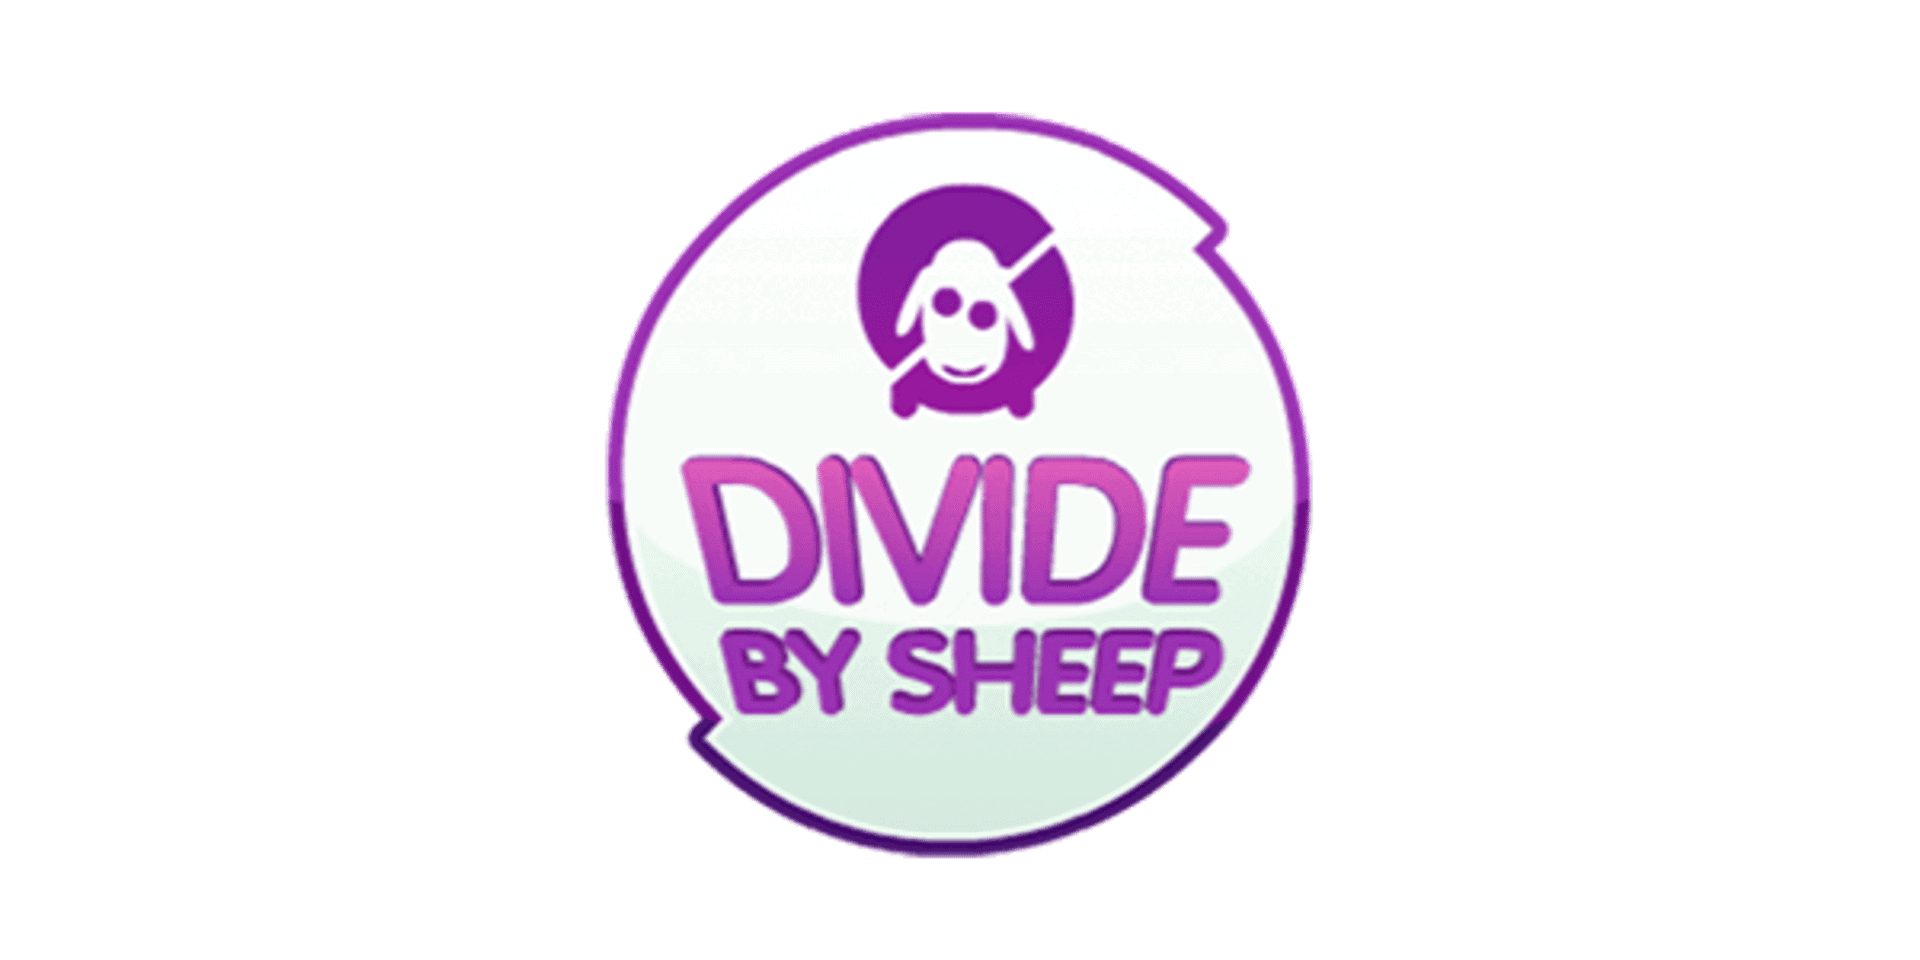 Divide By Sheep